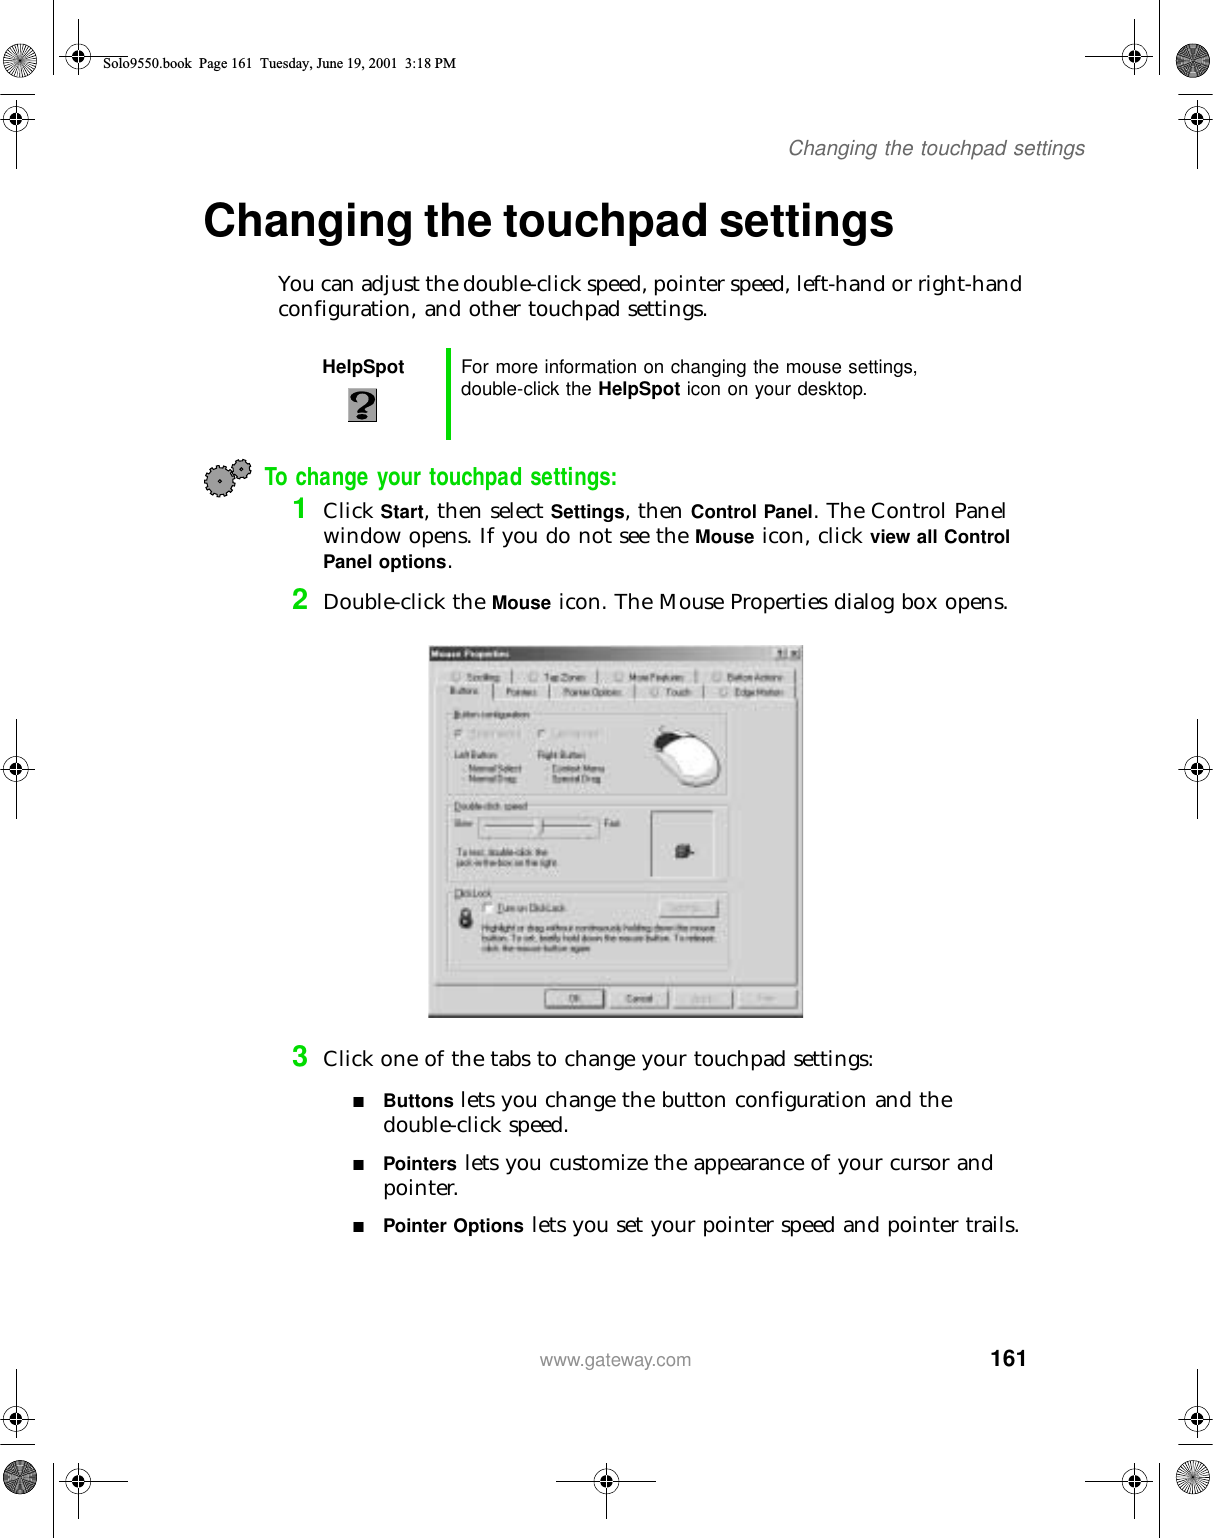 161Changing the touchpad settingswww.gateway.comChanging the touchpad settingsYou can adjust the double-click speed, pointer speed, left-hand or right-hand configuration, and other touchpad settings.To change your touchpad settings:1Click Start, then select Settings, then Control Panel. The Control Panel window opens. If you do not see the Mouse icon, click view all Control Panel options.2Double-click the Mouse icon. The Mouse Properties dialog box opens.3Click one of the tabs to change your touchpad settings:■Buttons lets you change the button configuration and the double-click speed.■Pointers lets you customize the appearance of your cursor and pointer.■Pointer Options lets you set your pointer speed and pointer trails.HelpSpot For more information on changing the mouse settings, double-click the HelpSpot icon on your desktop.Solo9550.book Page 161 Tuesday, June 19, 2001 3:18 PM